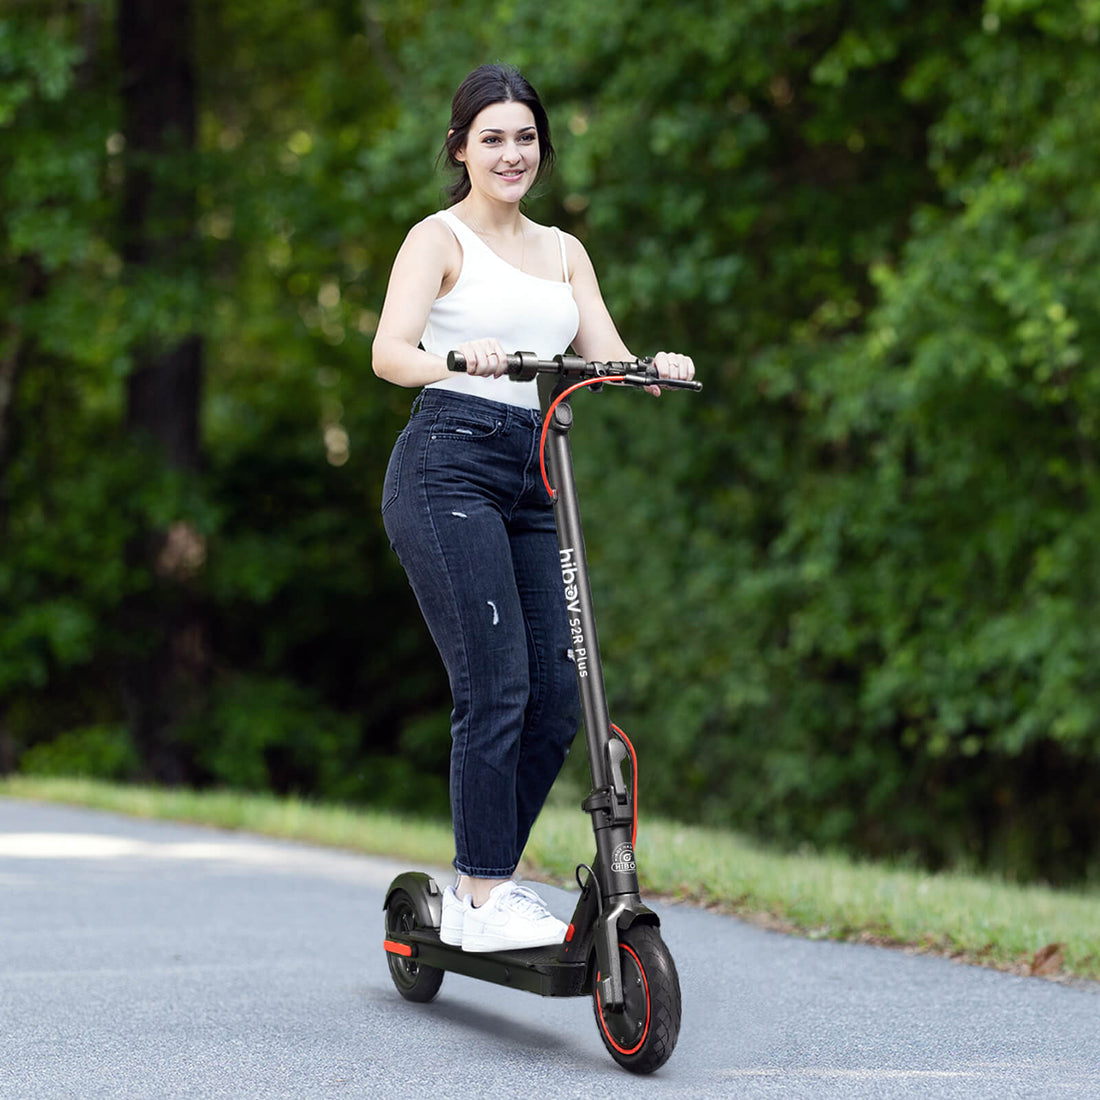 Hiboy S2R Plus Electric Scooter